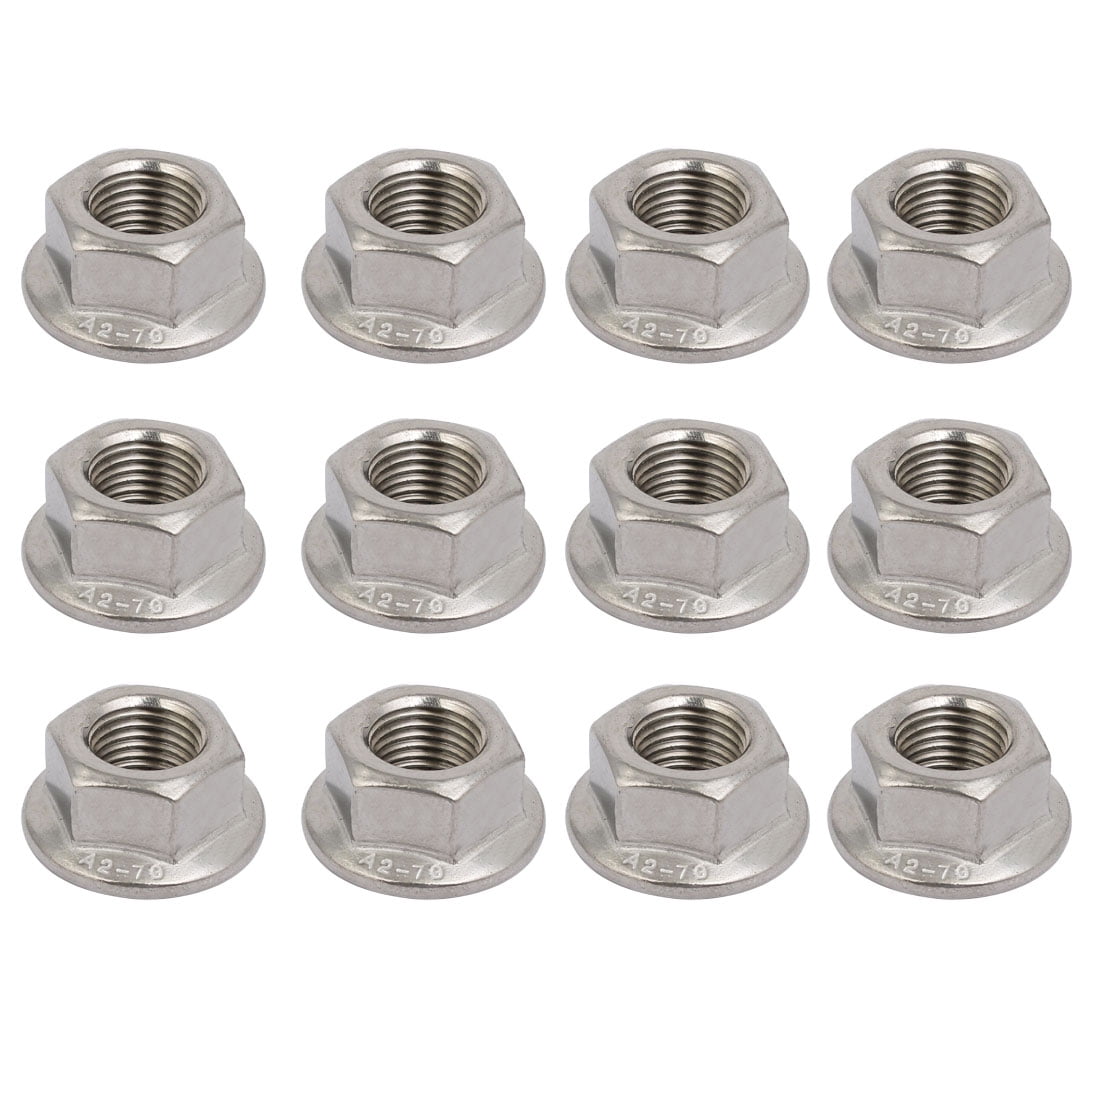 Metric Fine Pitch A2 Stainless Steel Hexagon Full Nuts